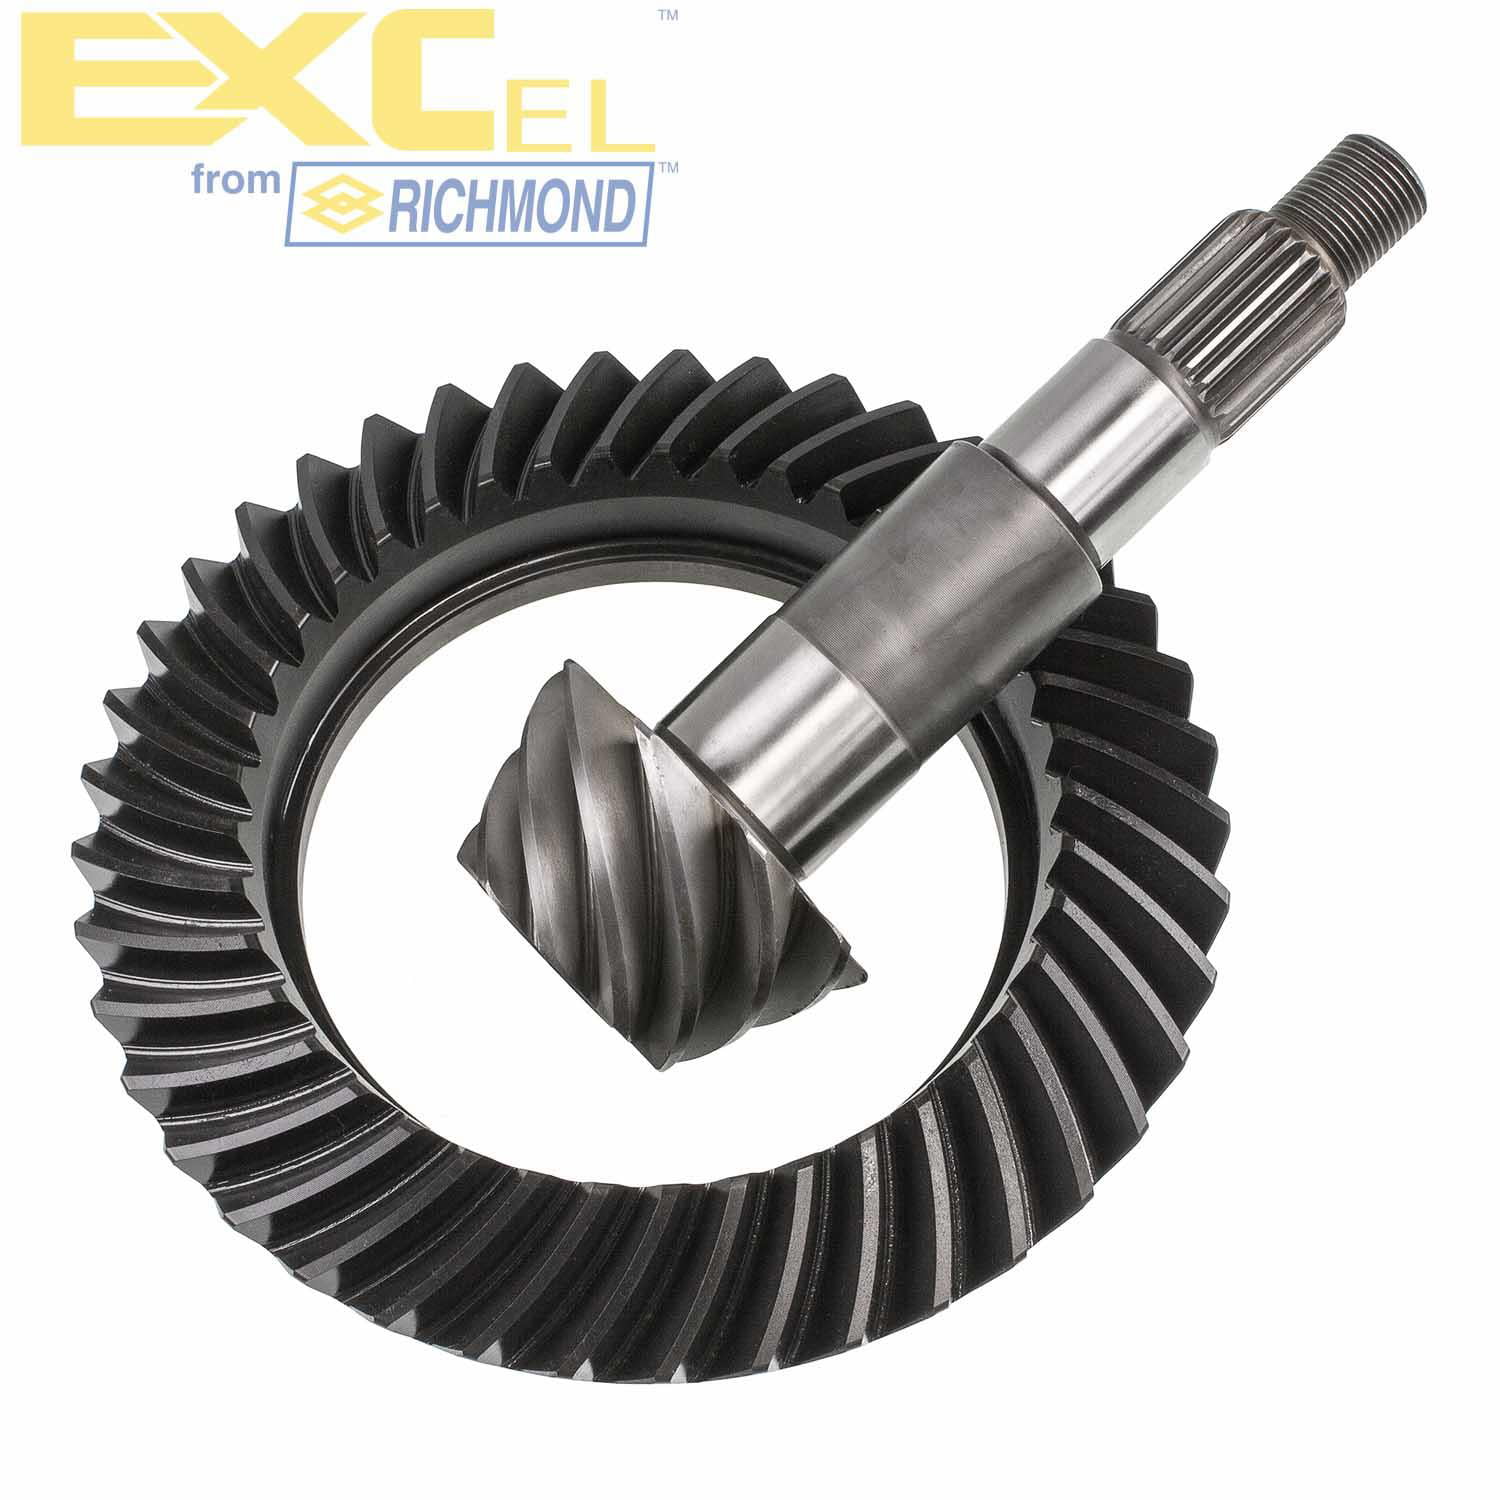 Richmond Gear D44456JK Differential Ring and Pinion Excel™ DANA 44 For Use  With Jeep Wrangler 2007-2016 JK Axle;  Inch Ring Gear;  Ratio |  Walmart Canada